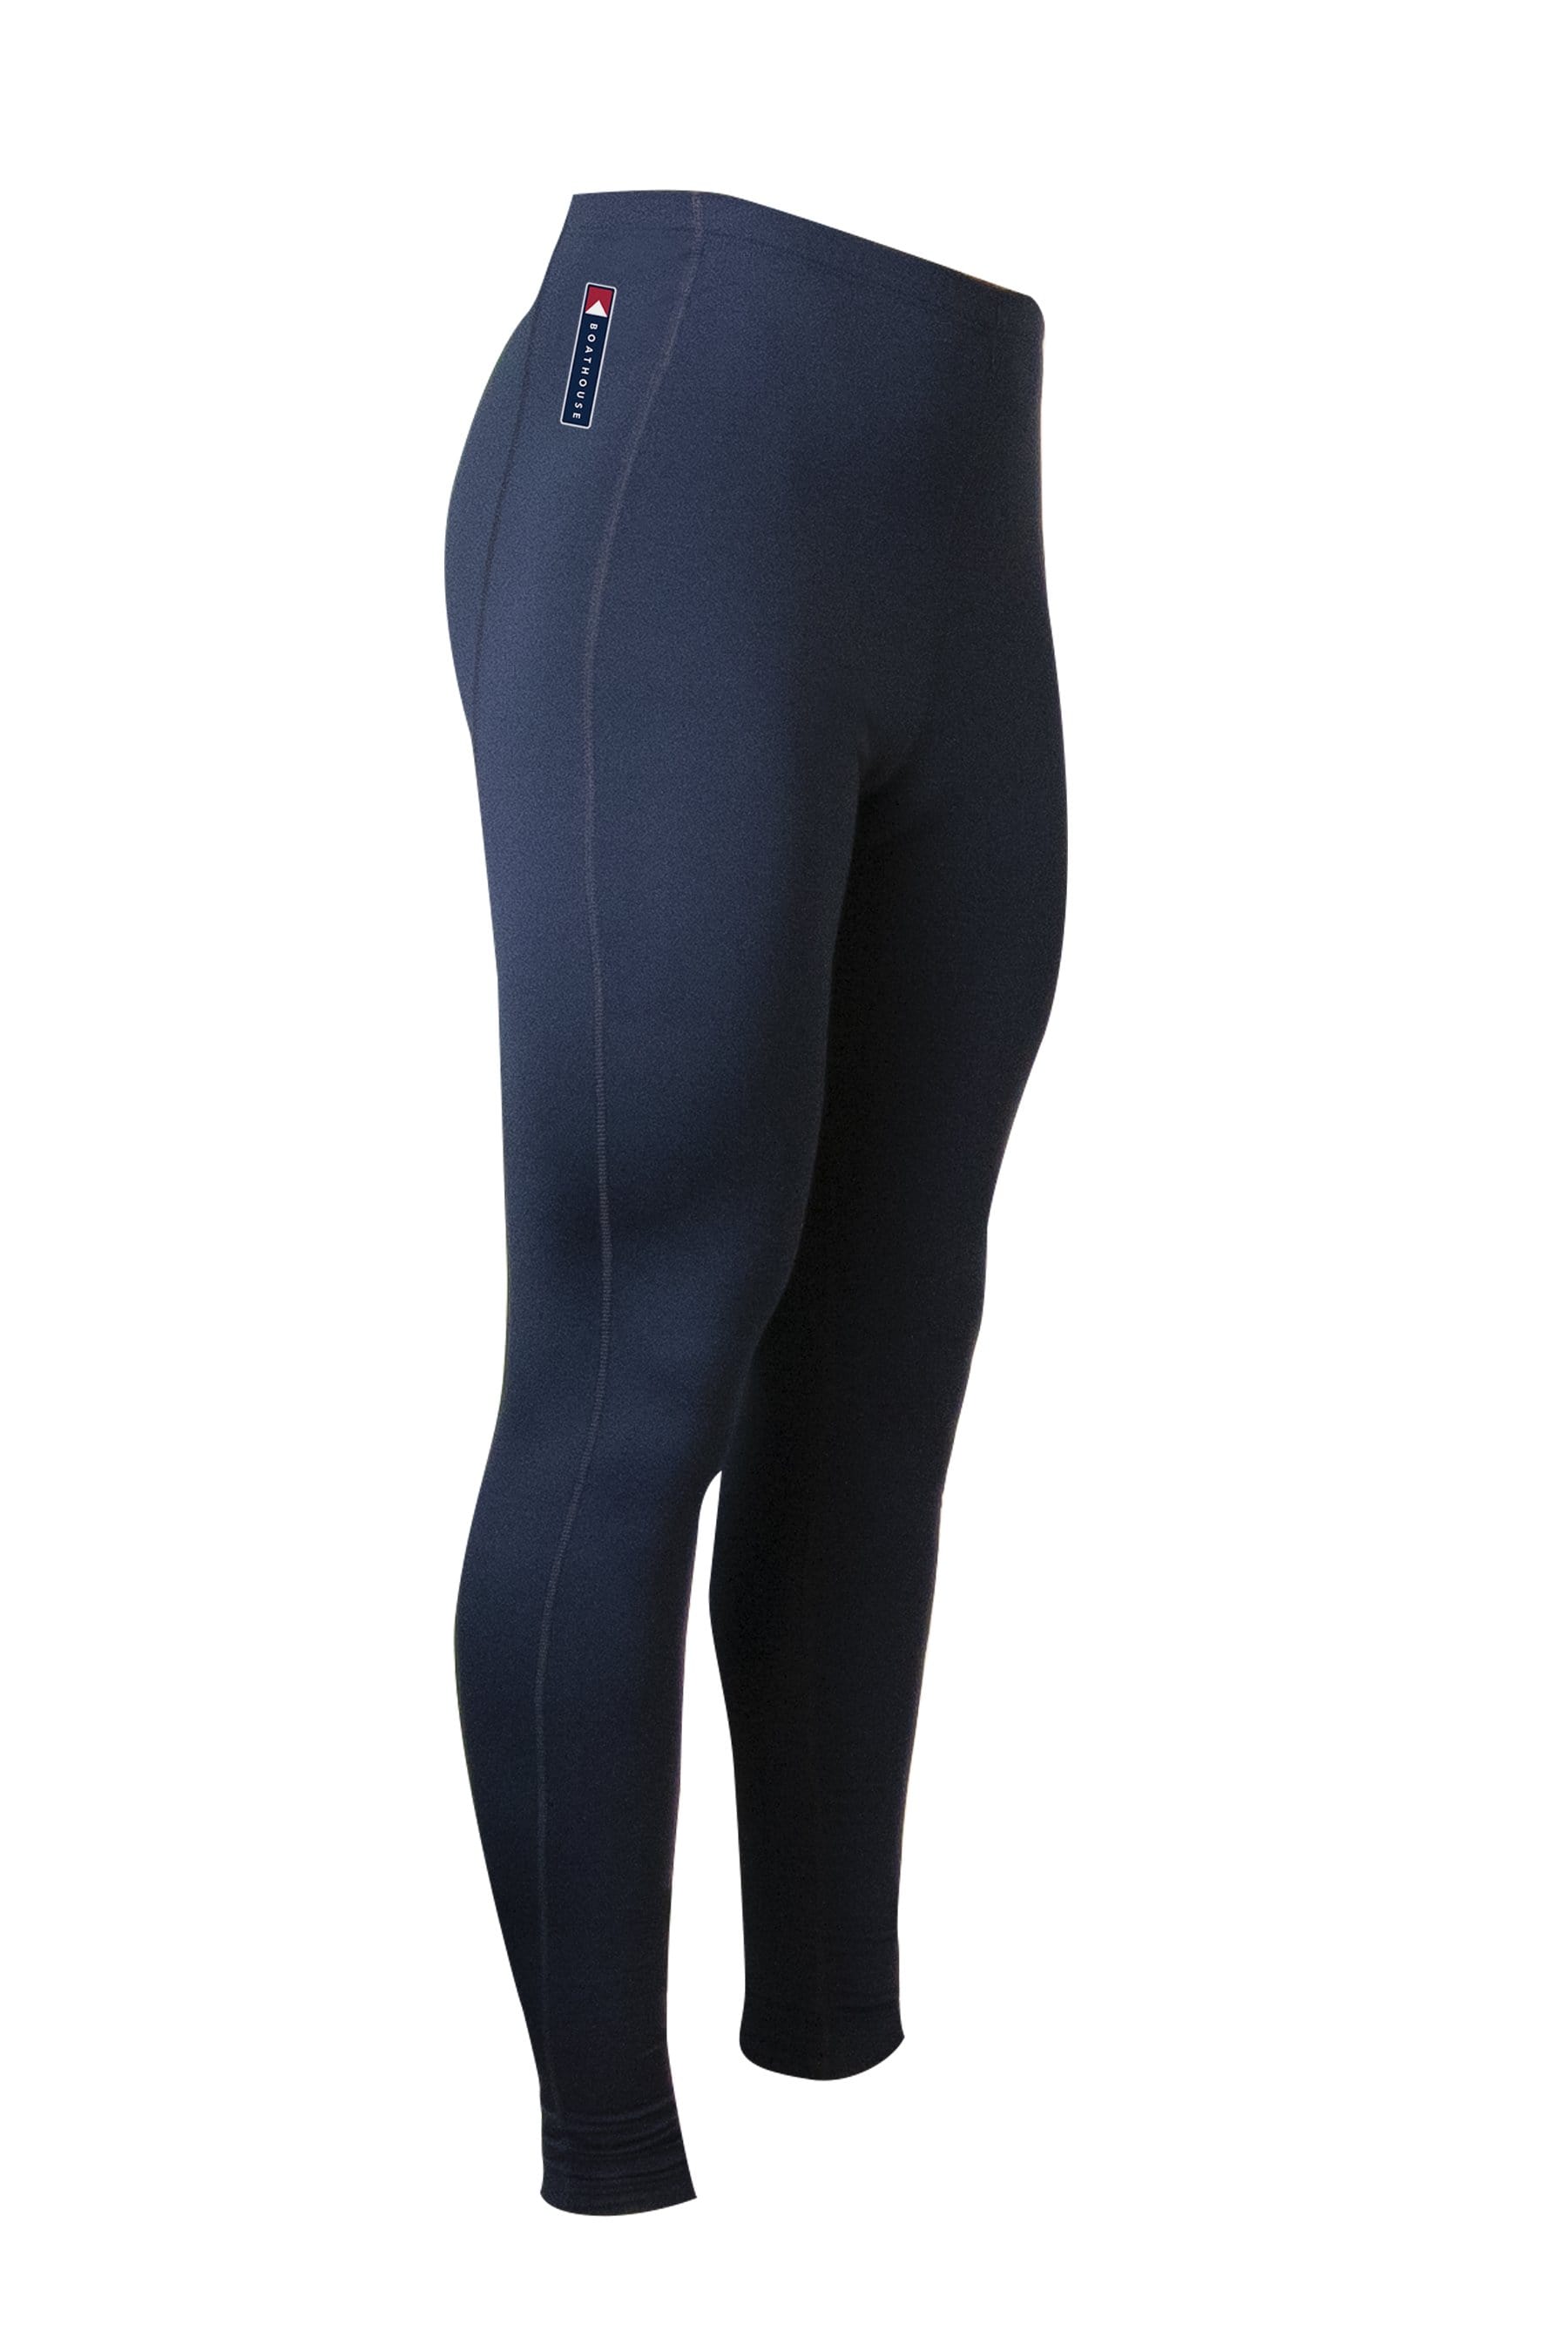 http://www.boathouse.com/cdn/shop/products/men-s-solid-training-tights-stblm710-navy-sml-29249087897690.jpg?v=1678818445